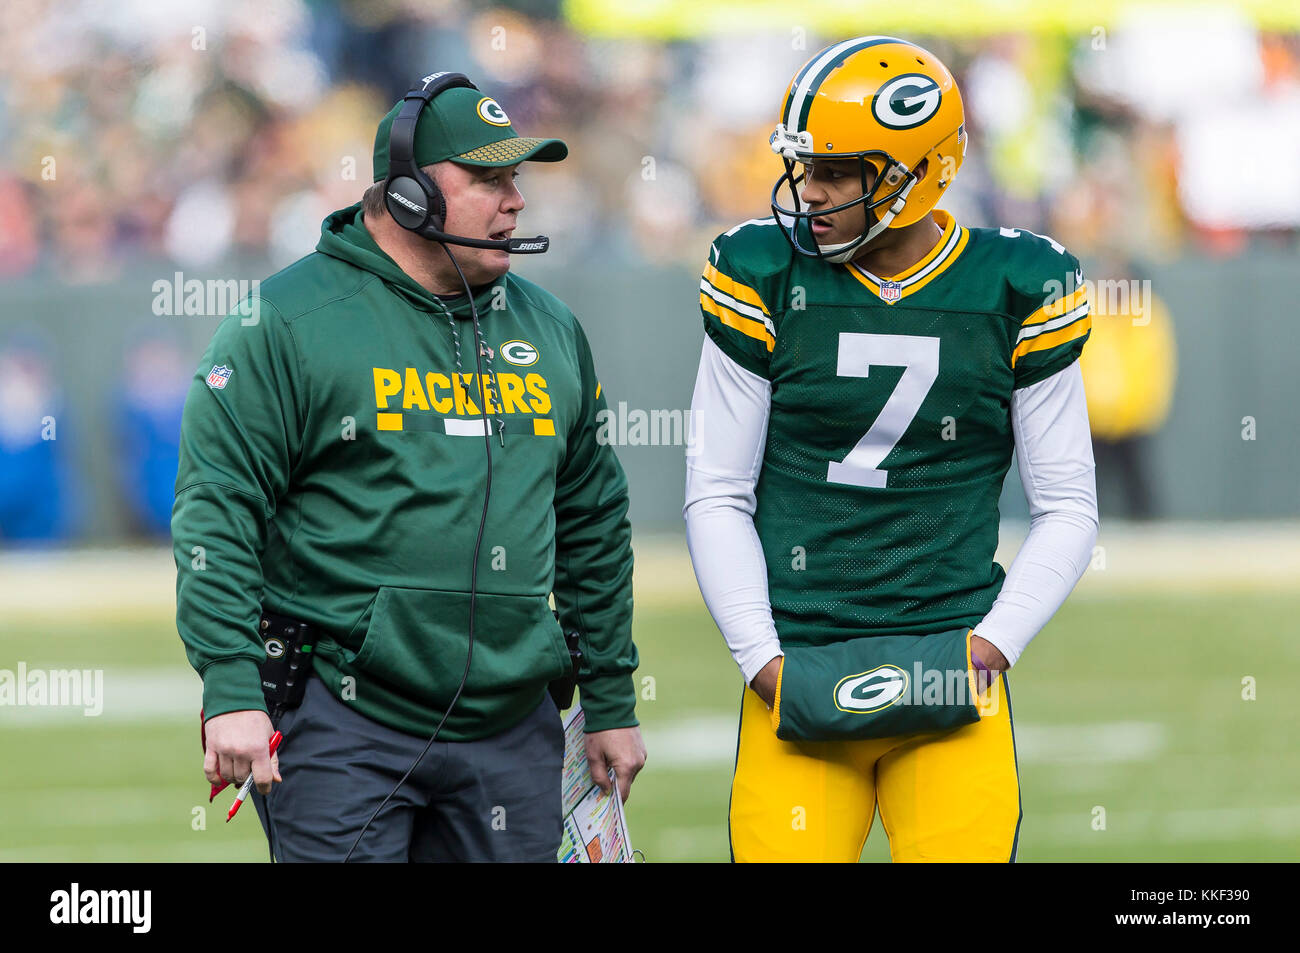 Green Bay, USA. Green Bay, WI, USA. 3rd Dec, 2017. Green Bay Packers head coach Mike McCarthy talks with his young quarterback Brett Hundley #7 during the NFL Football game between the Tampa Bay Buccaneers and the Green Bay Packers at Lambeau Field in Green Bay, WI. John Fisher/CSM/Alamy Live News Stock Photo